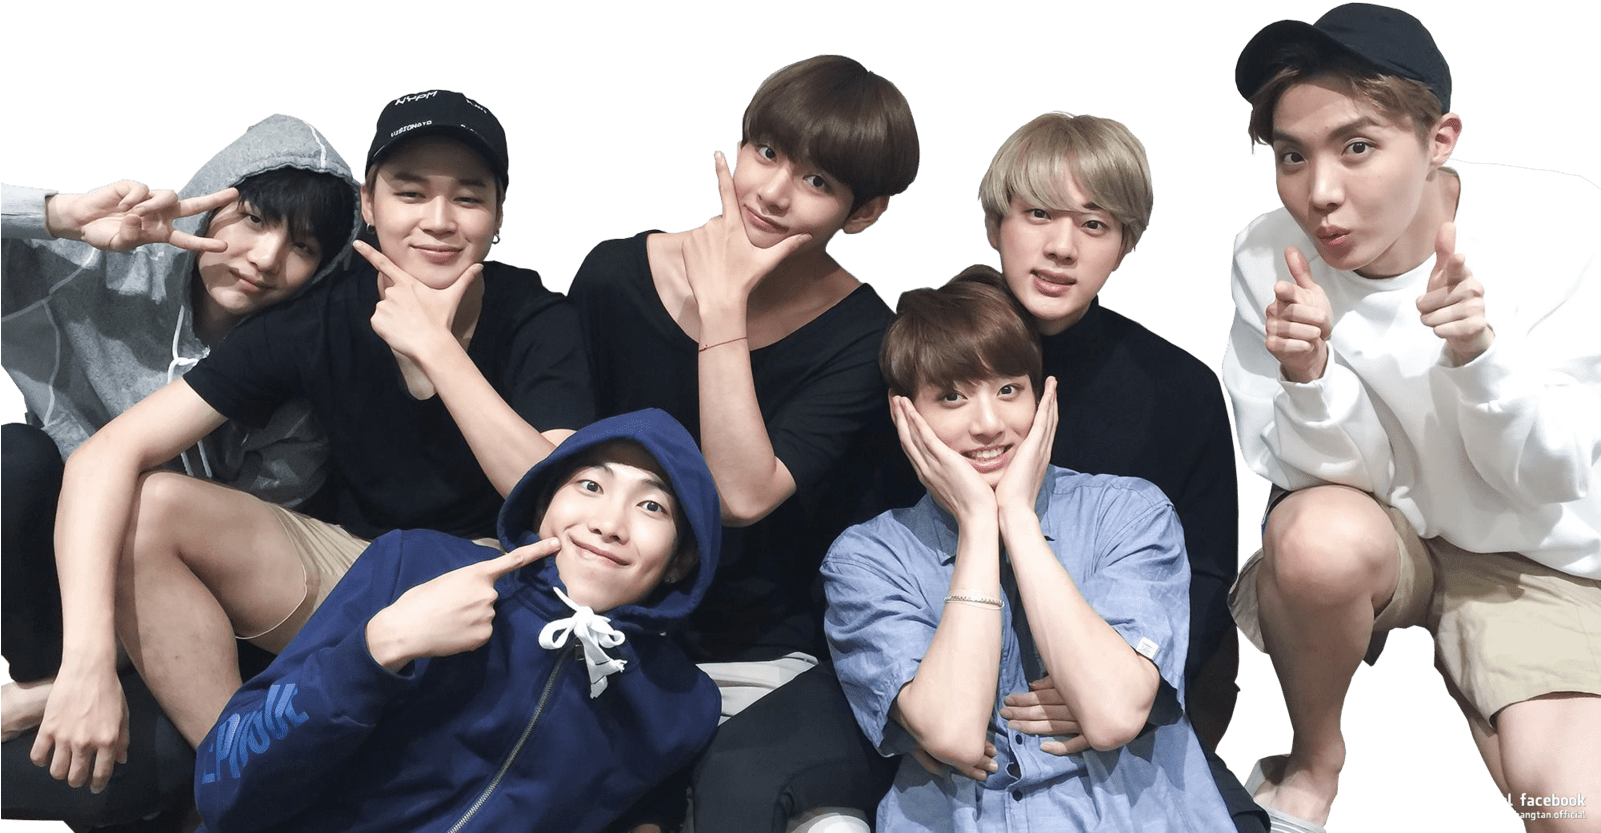 Cute Bts Wallpaper For Desktop Pc Wallpaper HD Posted By Sarah Walker i love these threads!